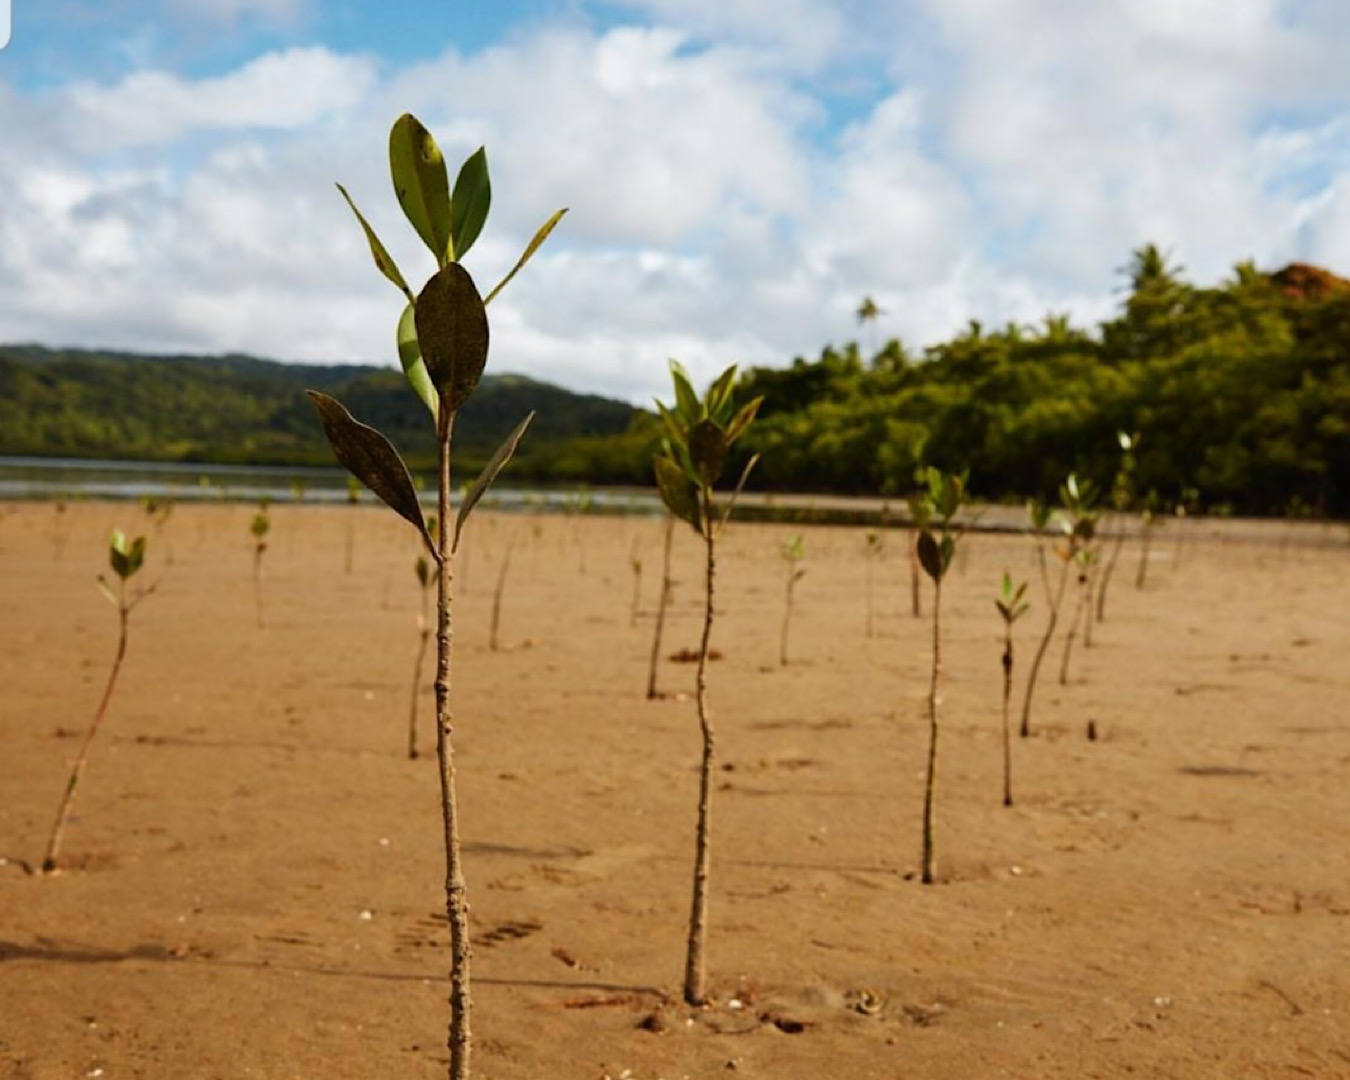 Baby mangroves planted in sand. 